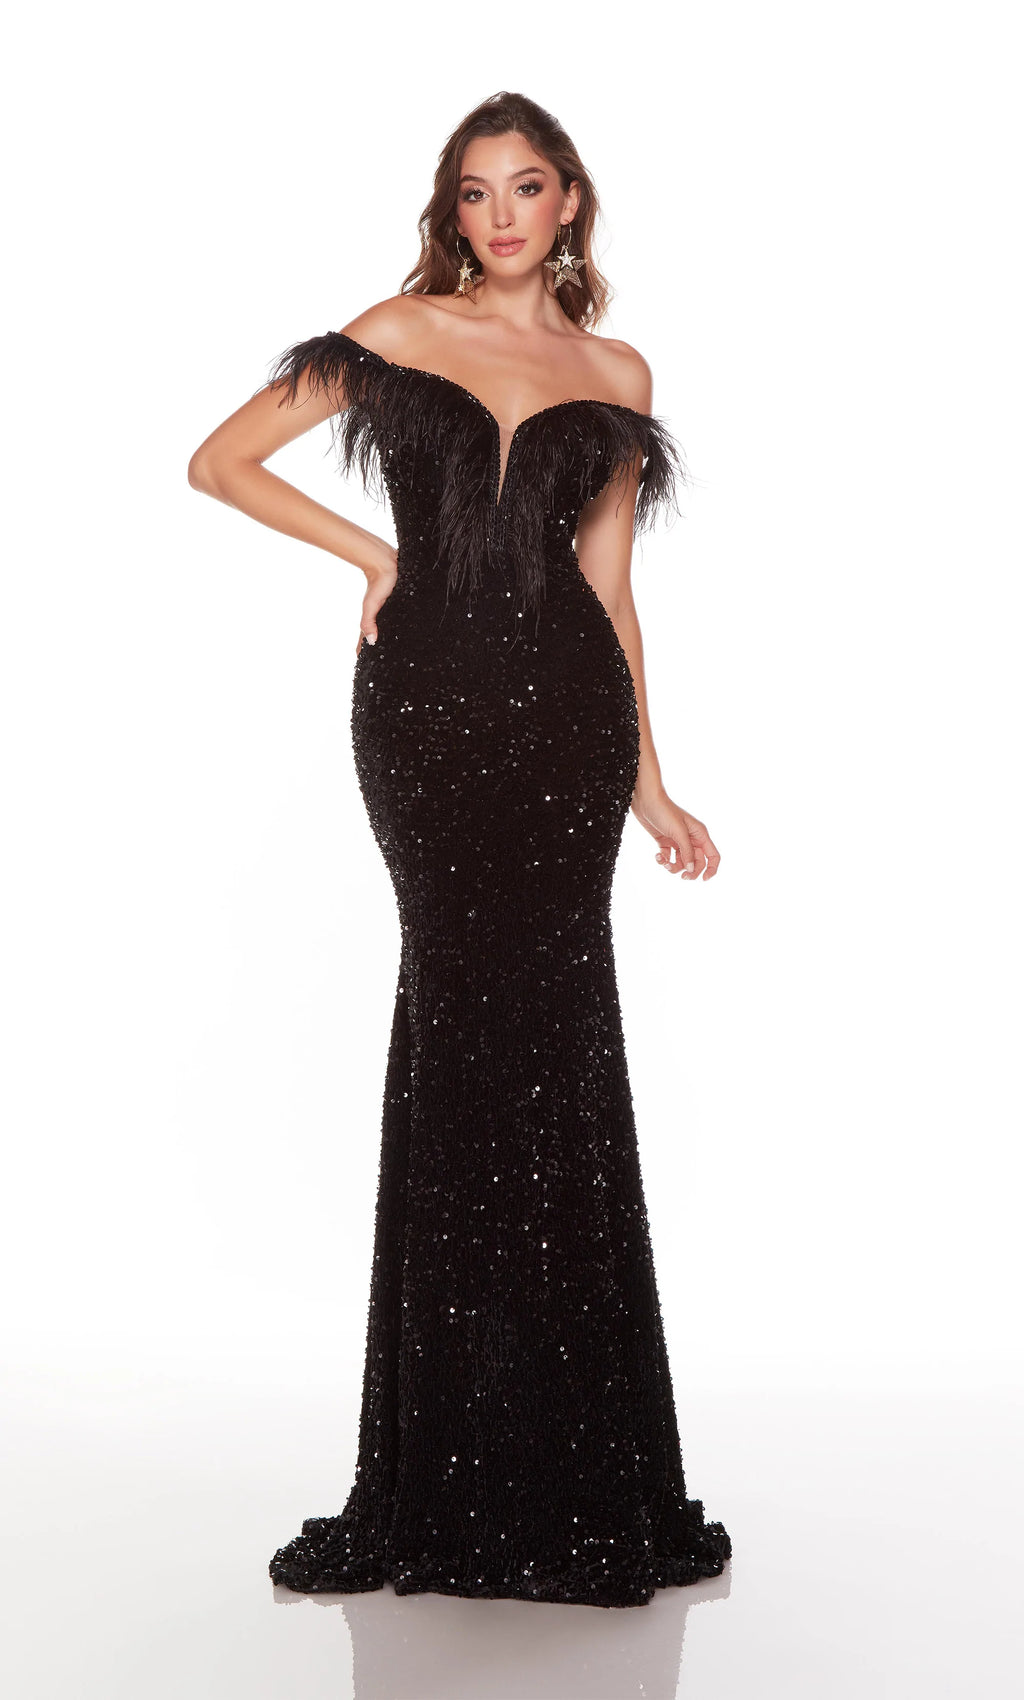 This Alyce Paris 61373 black long party dress is crafted in plush sequins, with ostrich feathers and beaded trims along the plunging off-the-shoulder neckline. This sparkly slim prom gown exits with a semi-open back and a sweep train.